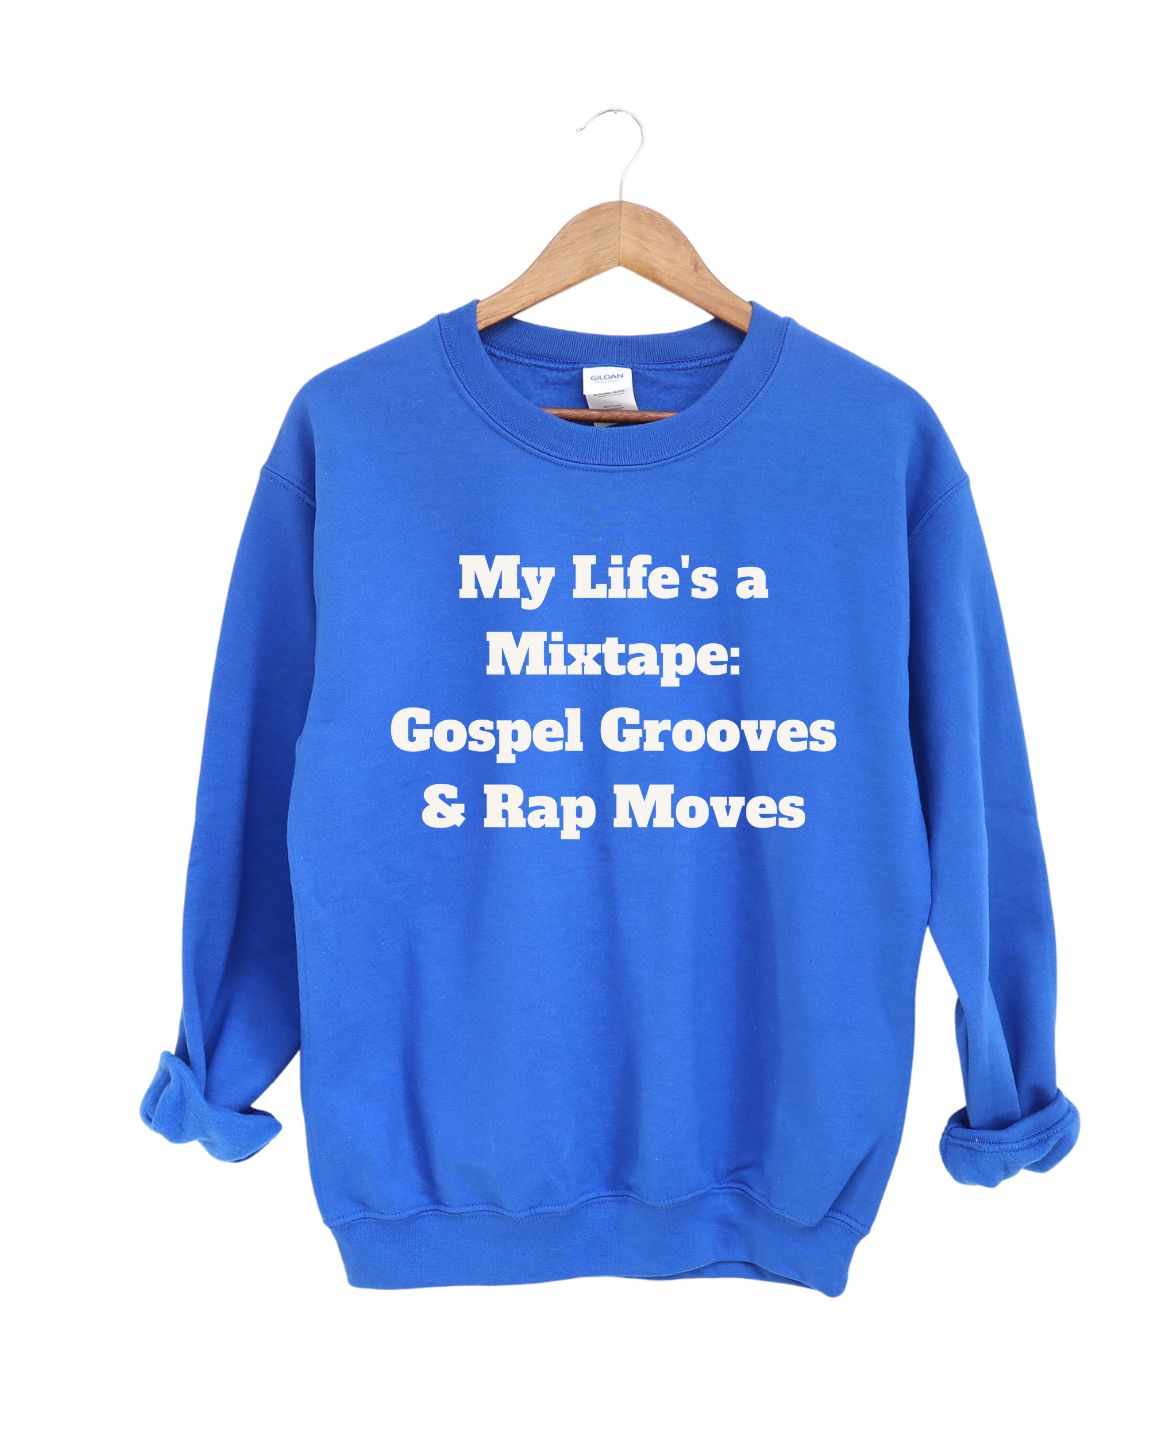 My Life is a Mix Tape Gospel Grooves and Rap Moves  Sweatshirt